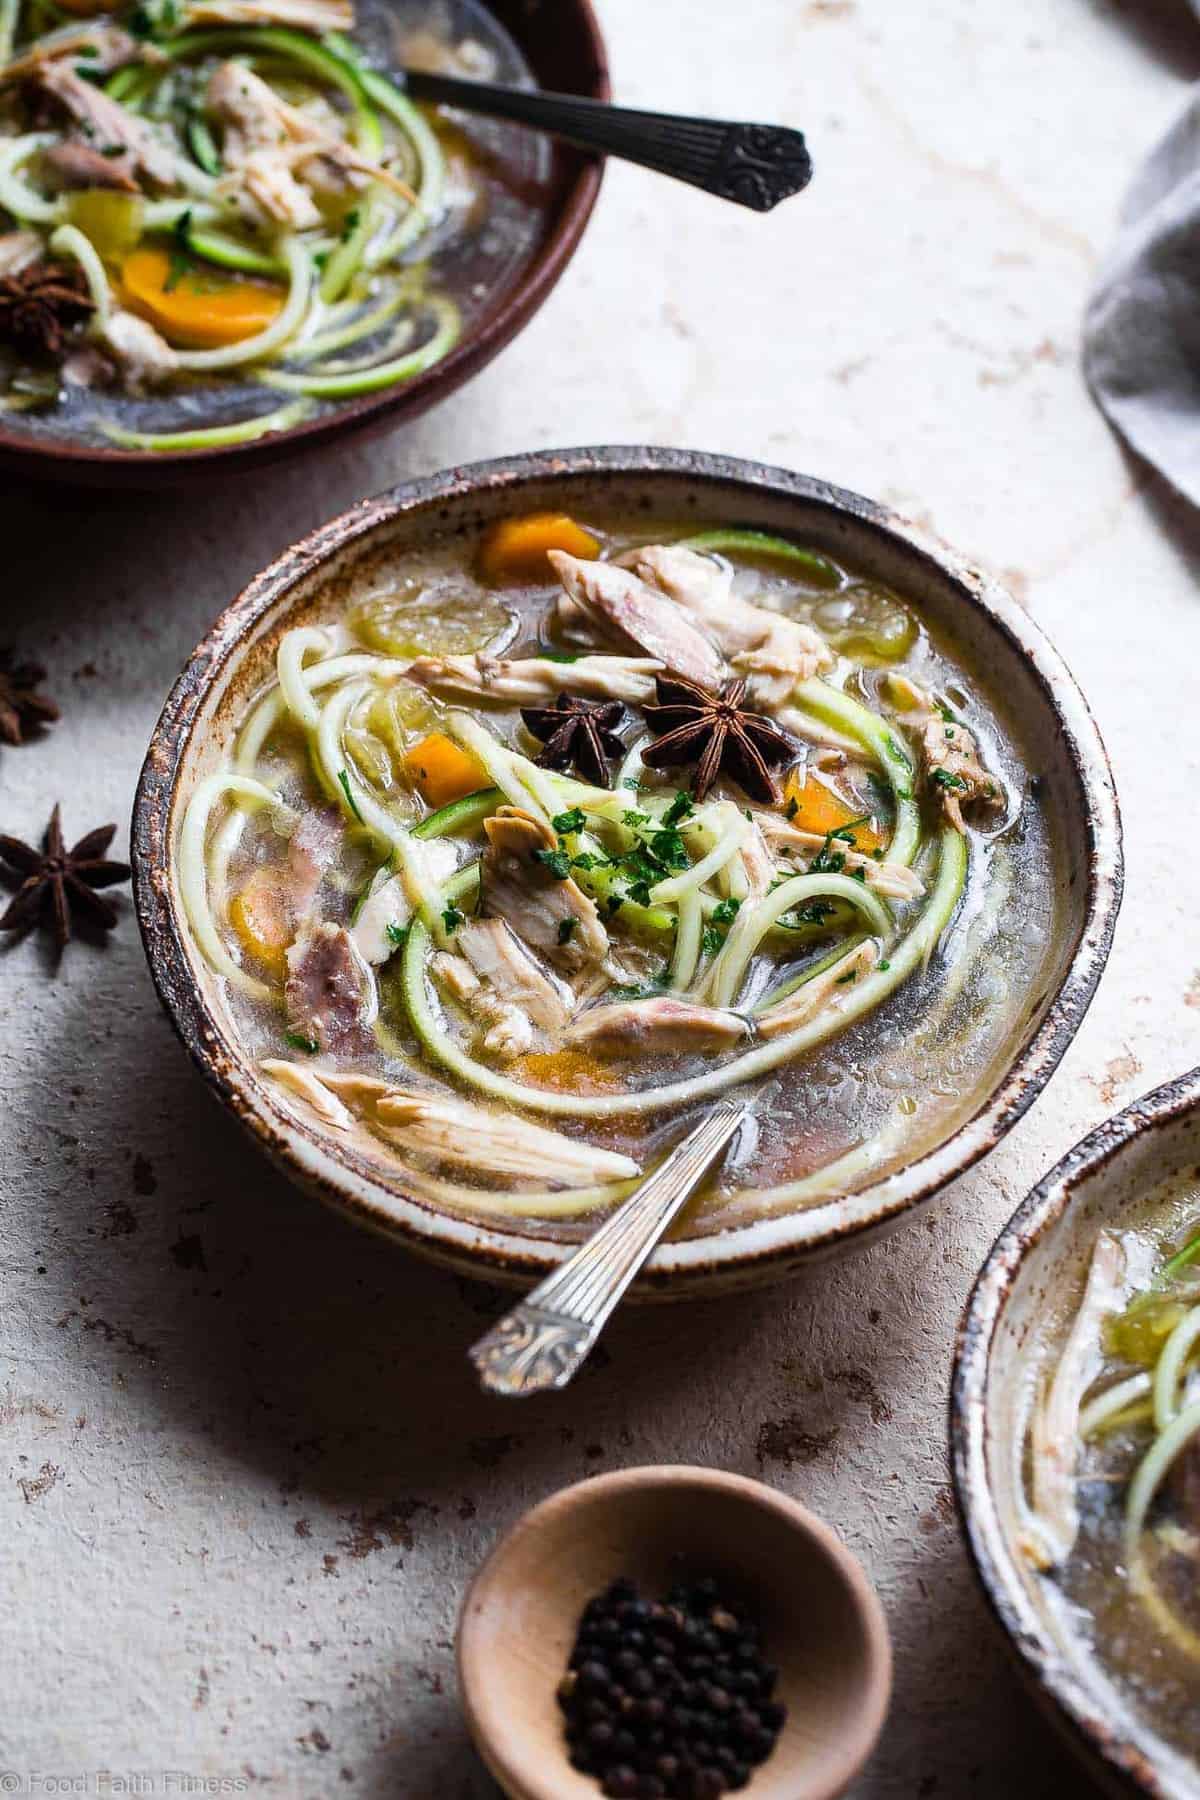 Keto Chicken Noodle Soup - This easy homemade healthy keto Chicken Zoodle Soup uses zucchini noodles so it's gluten free, low carb, paleo, whole30 AND packed with protein! You won't miss the noodles! | #Foodfaithfitness | #Glutenfree #Lowcarb #Keto #Whole30 #Paleo